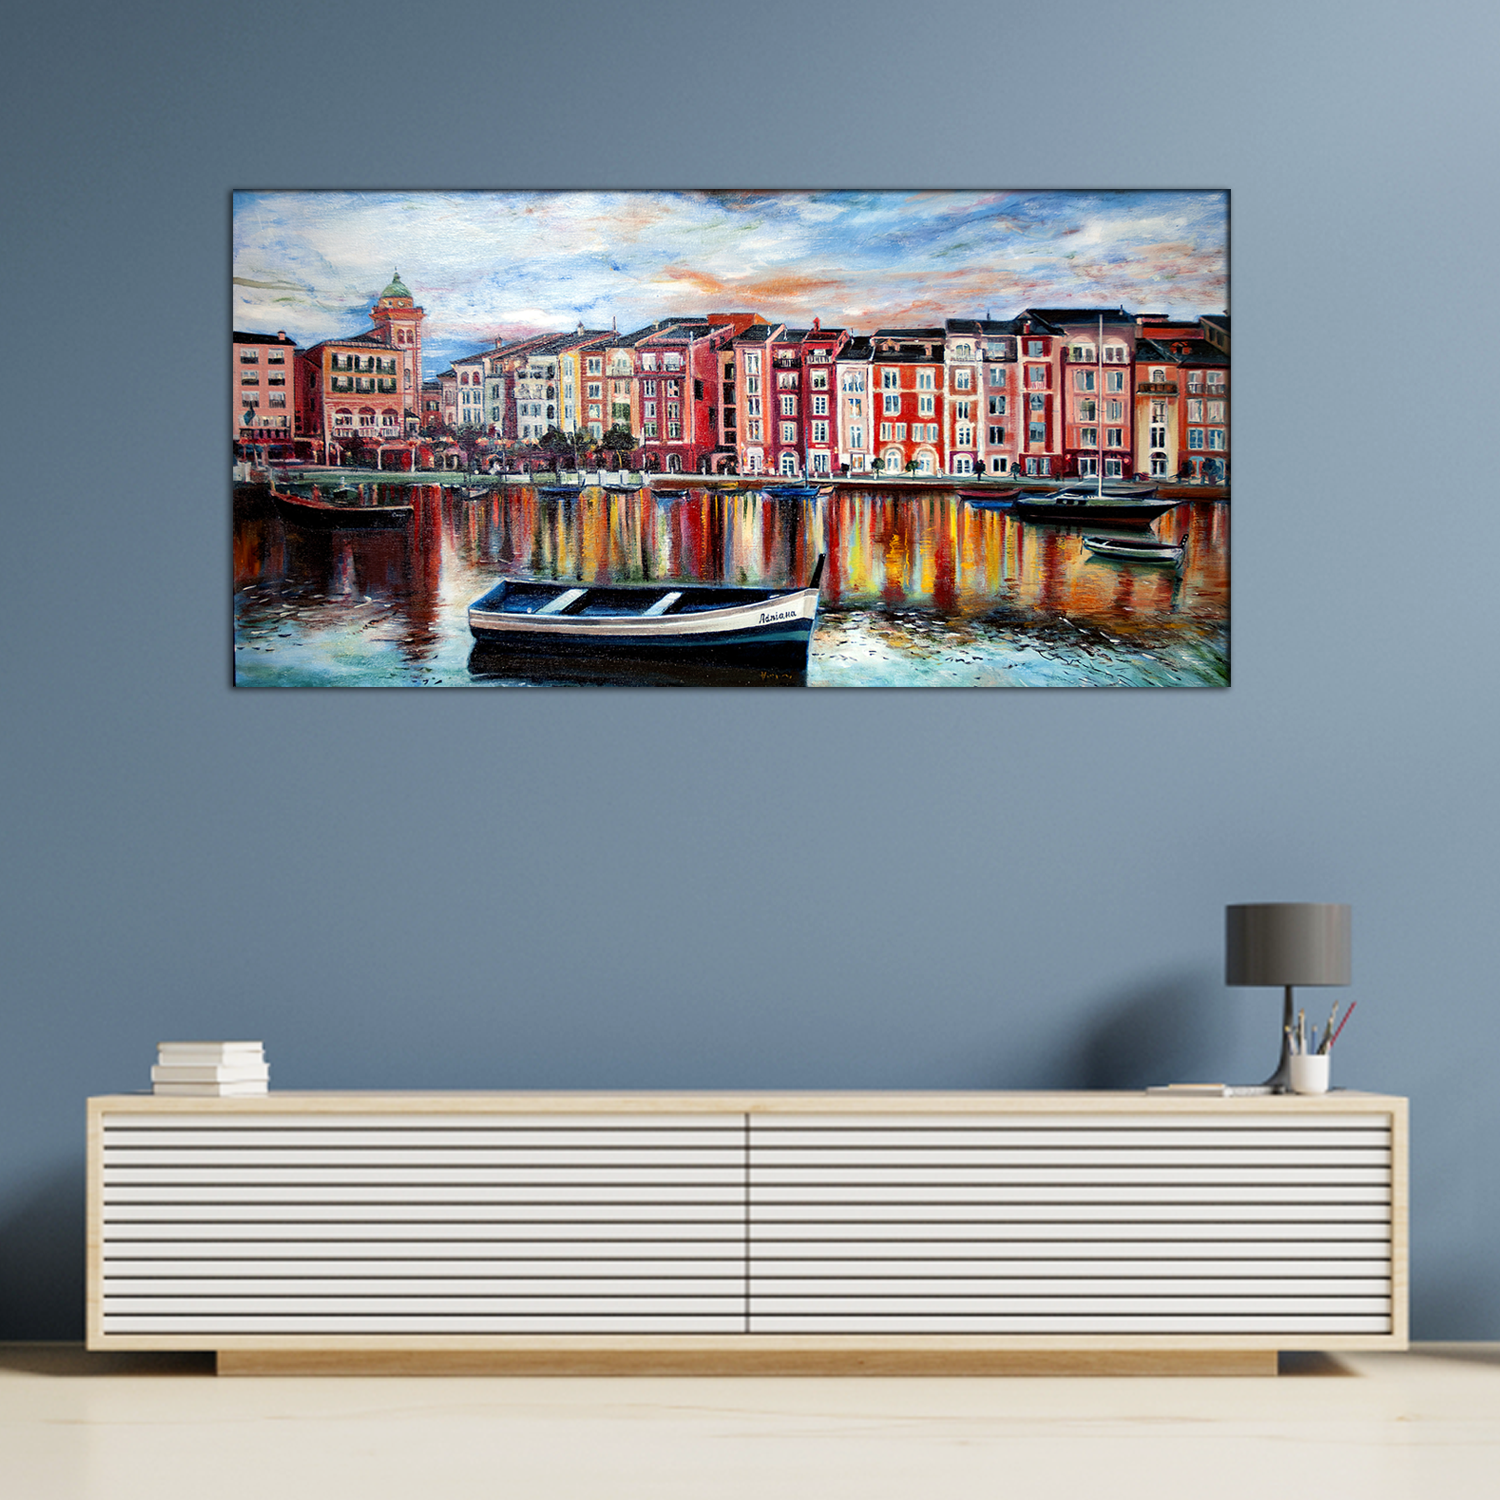 The Sunset Canvas Print Wall Painting